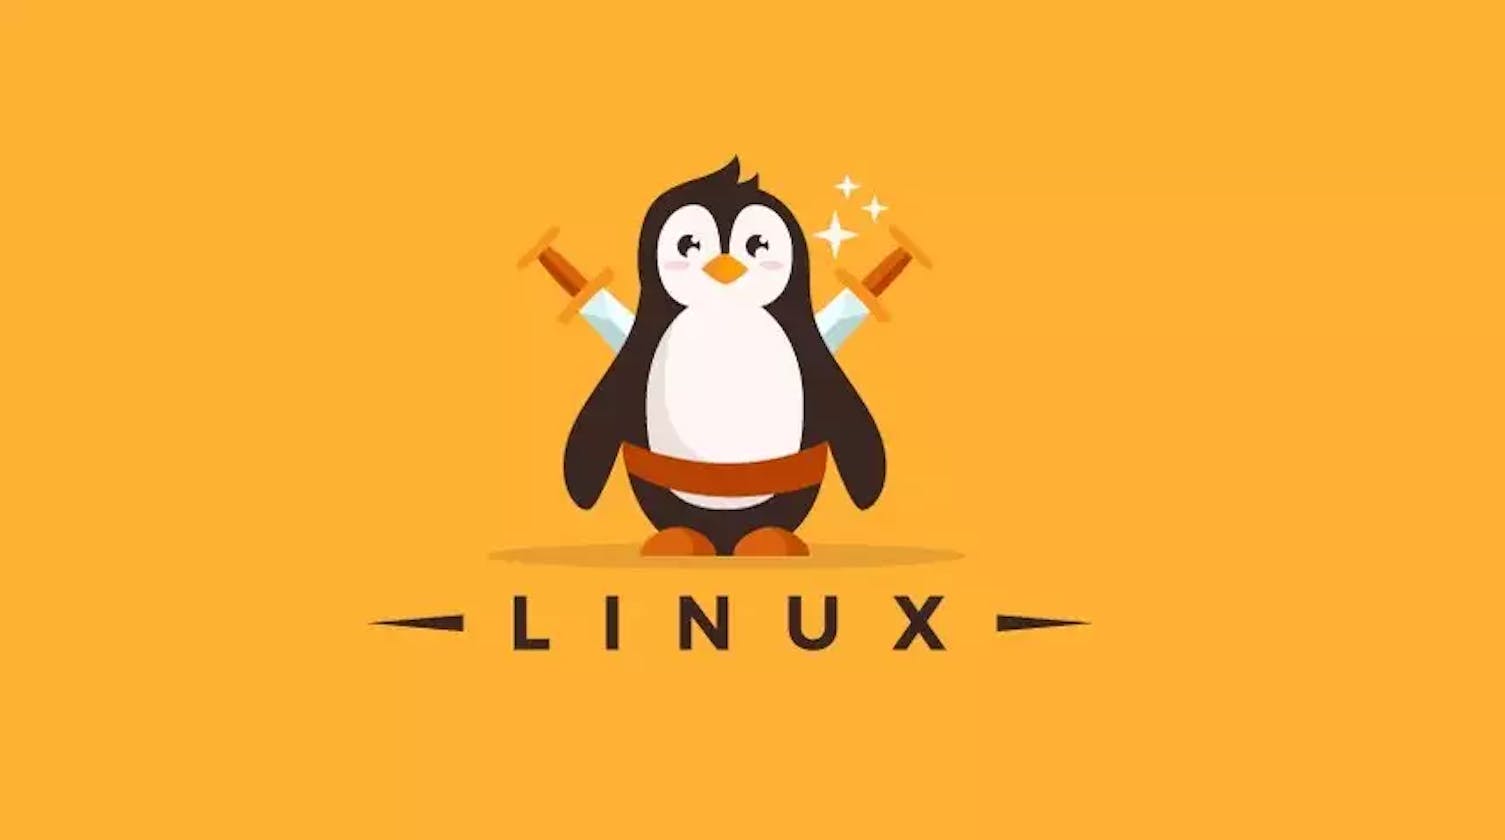 Learning the concepts of Linux